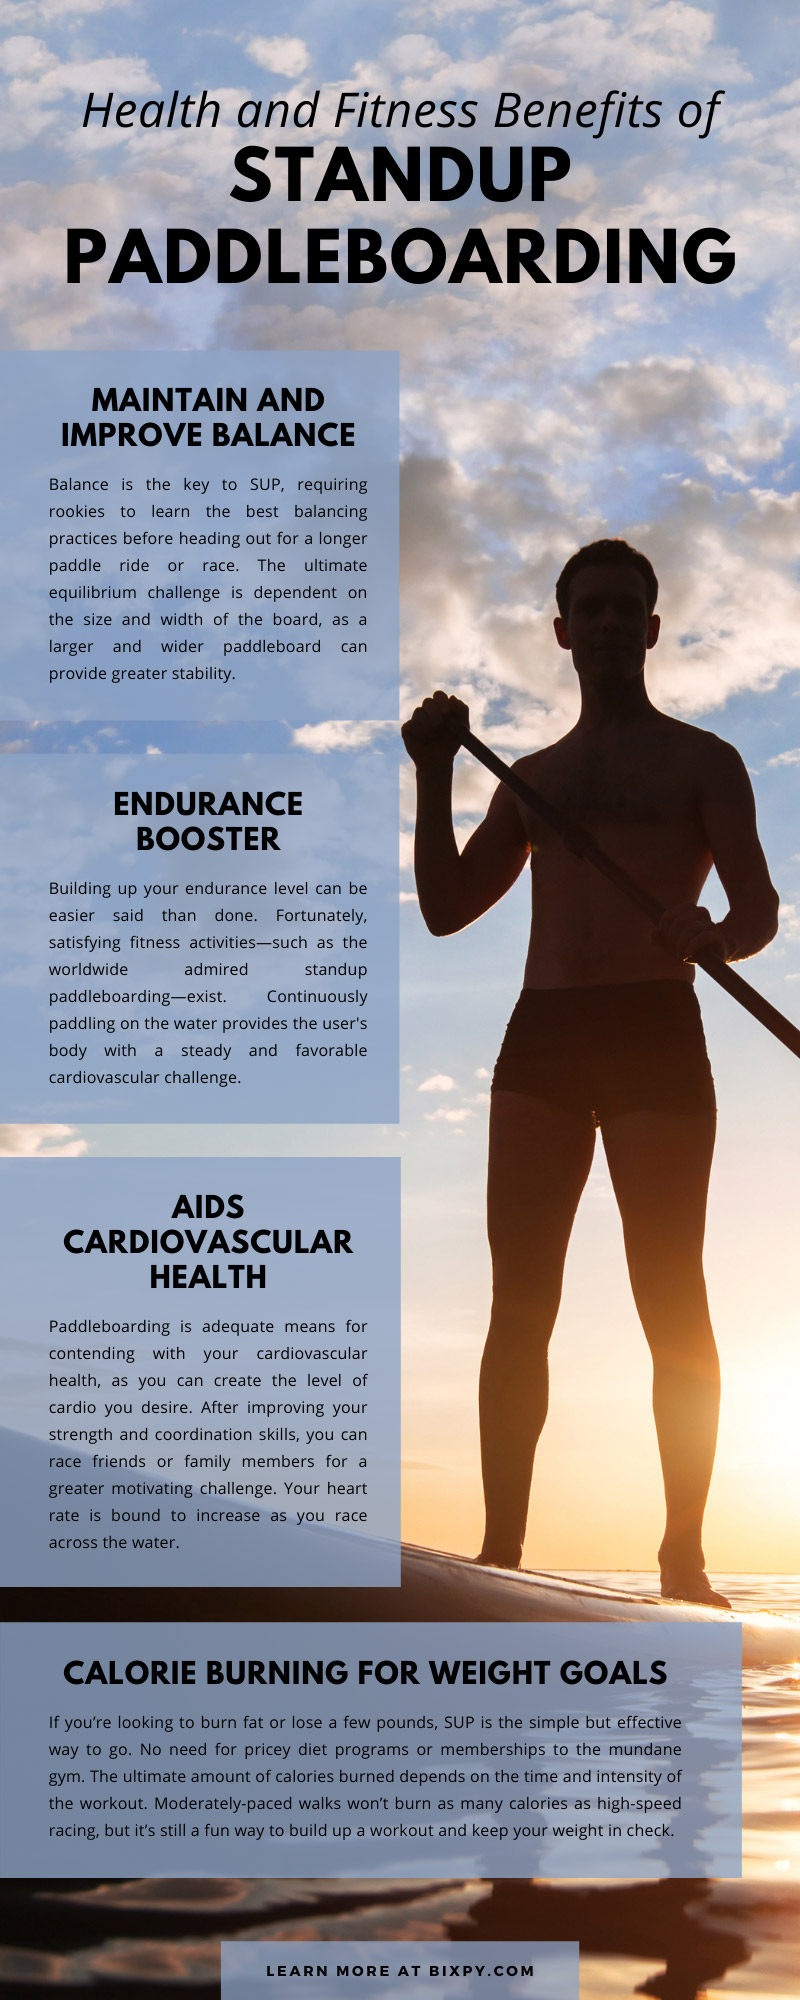 10 Health and Fitness Benefits of Standup Paddleboarding